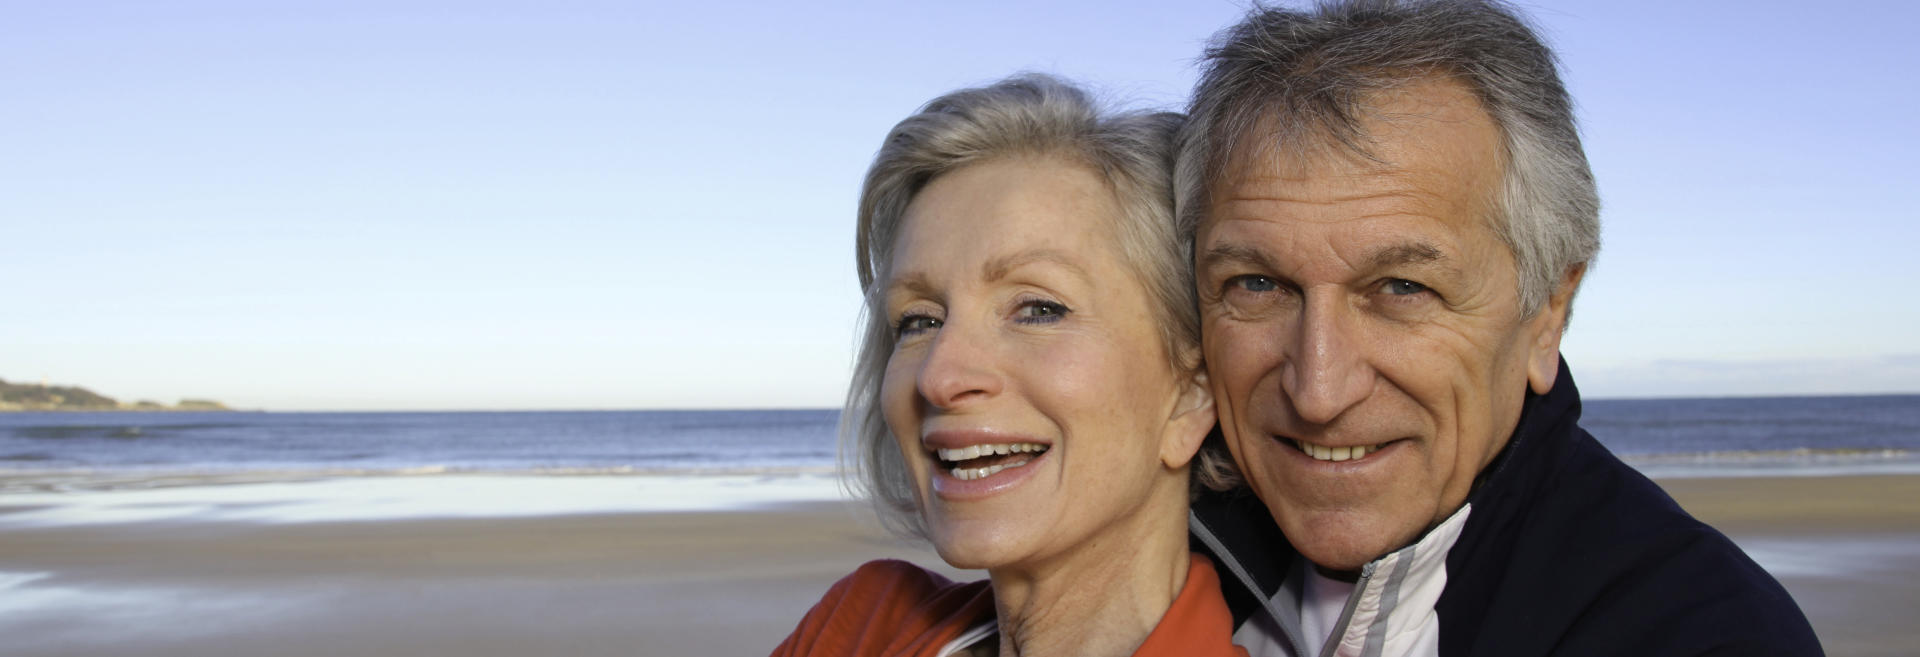 Happy mature couple with perfect smiles.